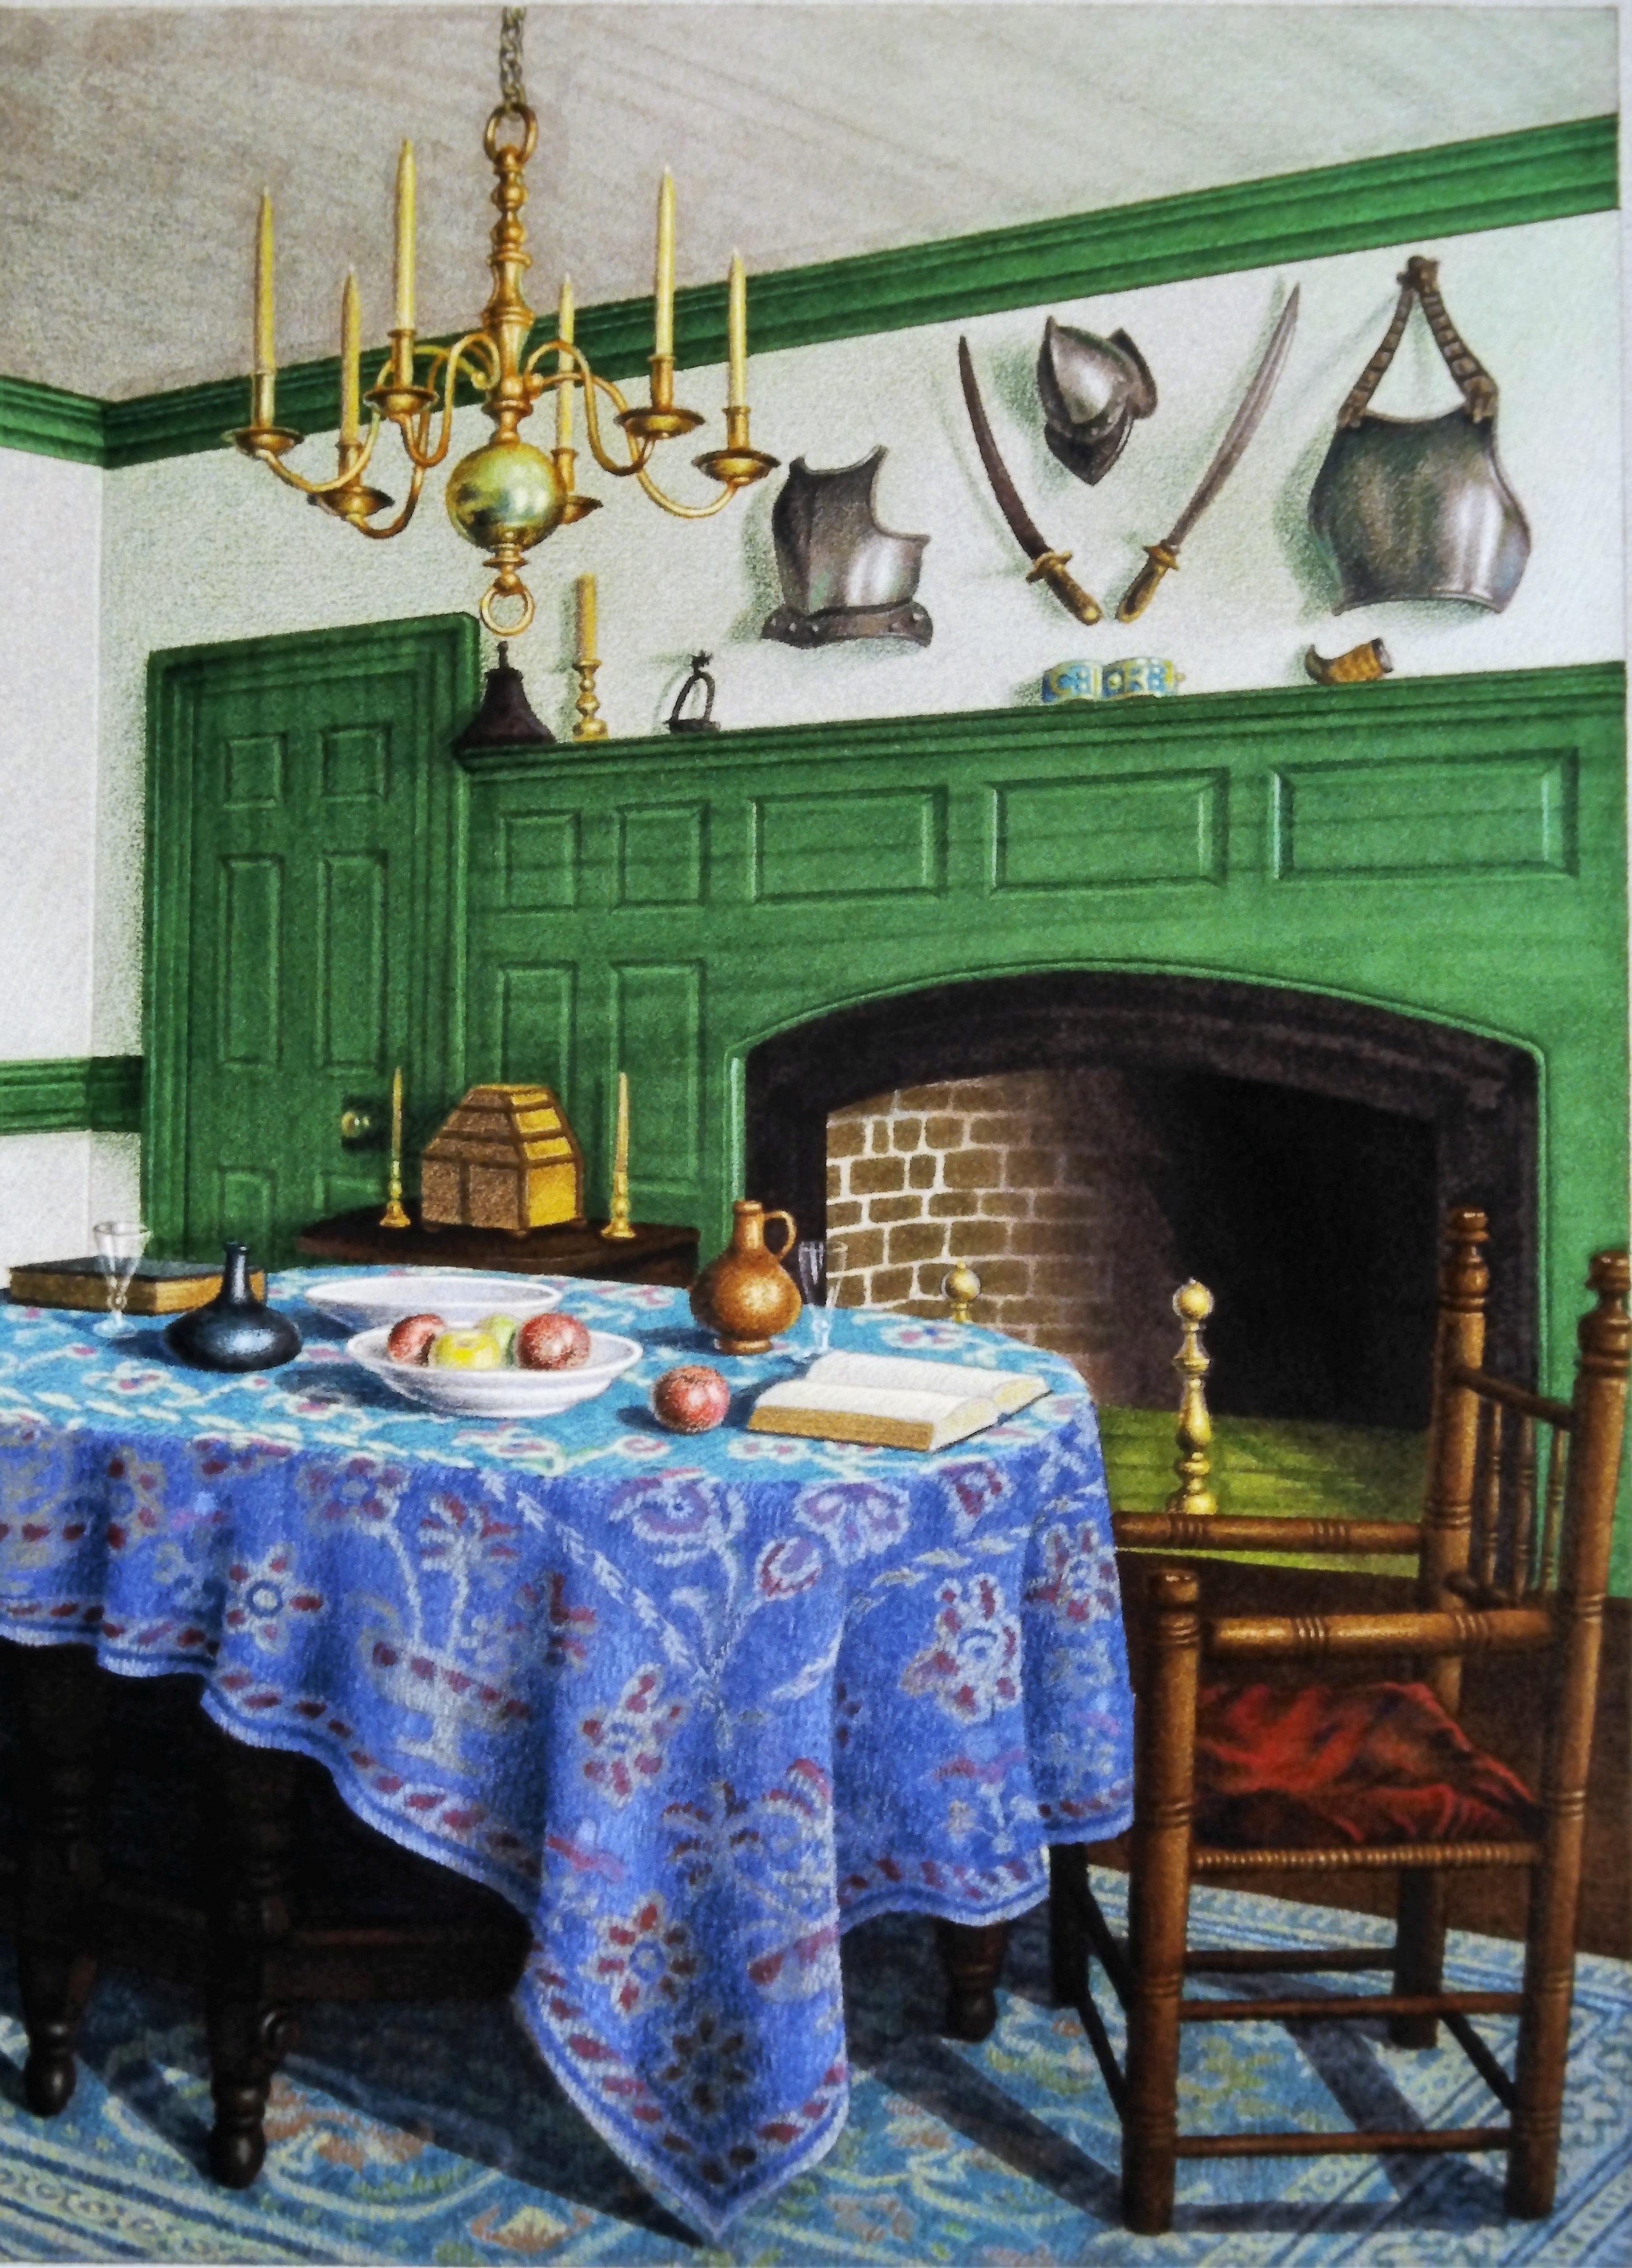 colored pencil drawing of room with green door, trim, and fireplace, table with blue tablecloth, chair, decorative wall hangings with swords and helmet, chandelier, rug